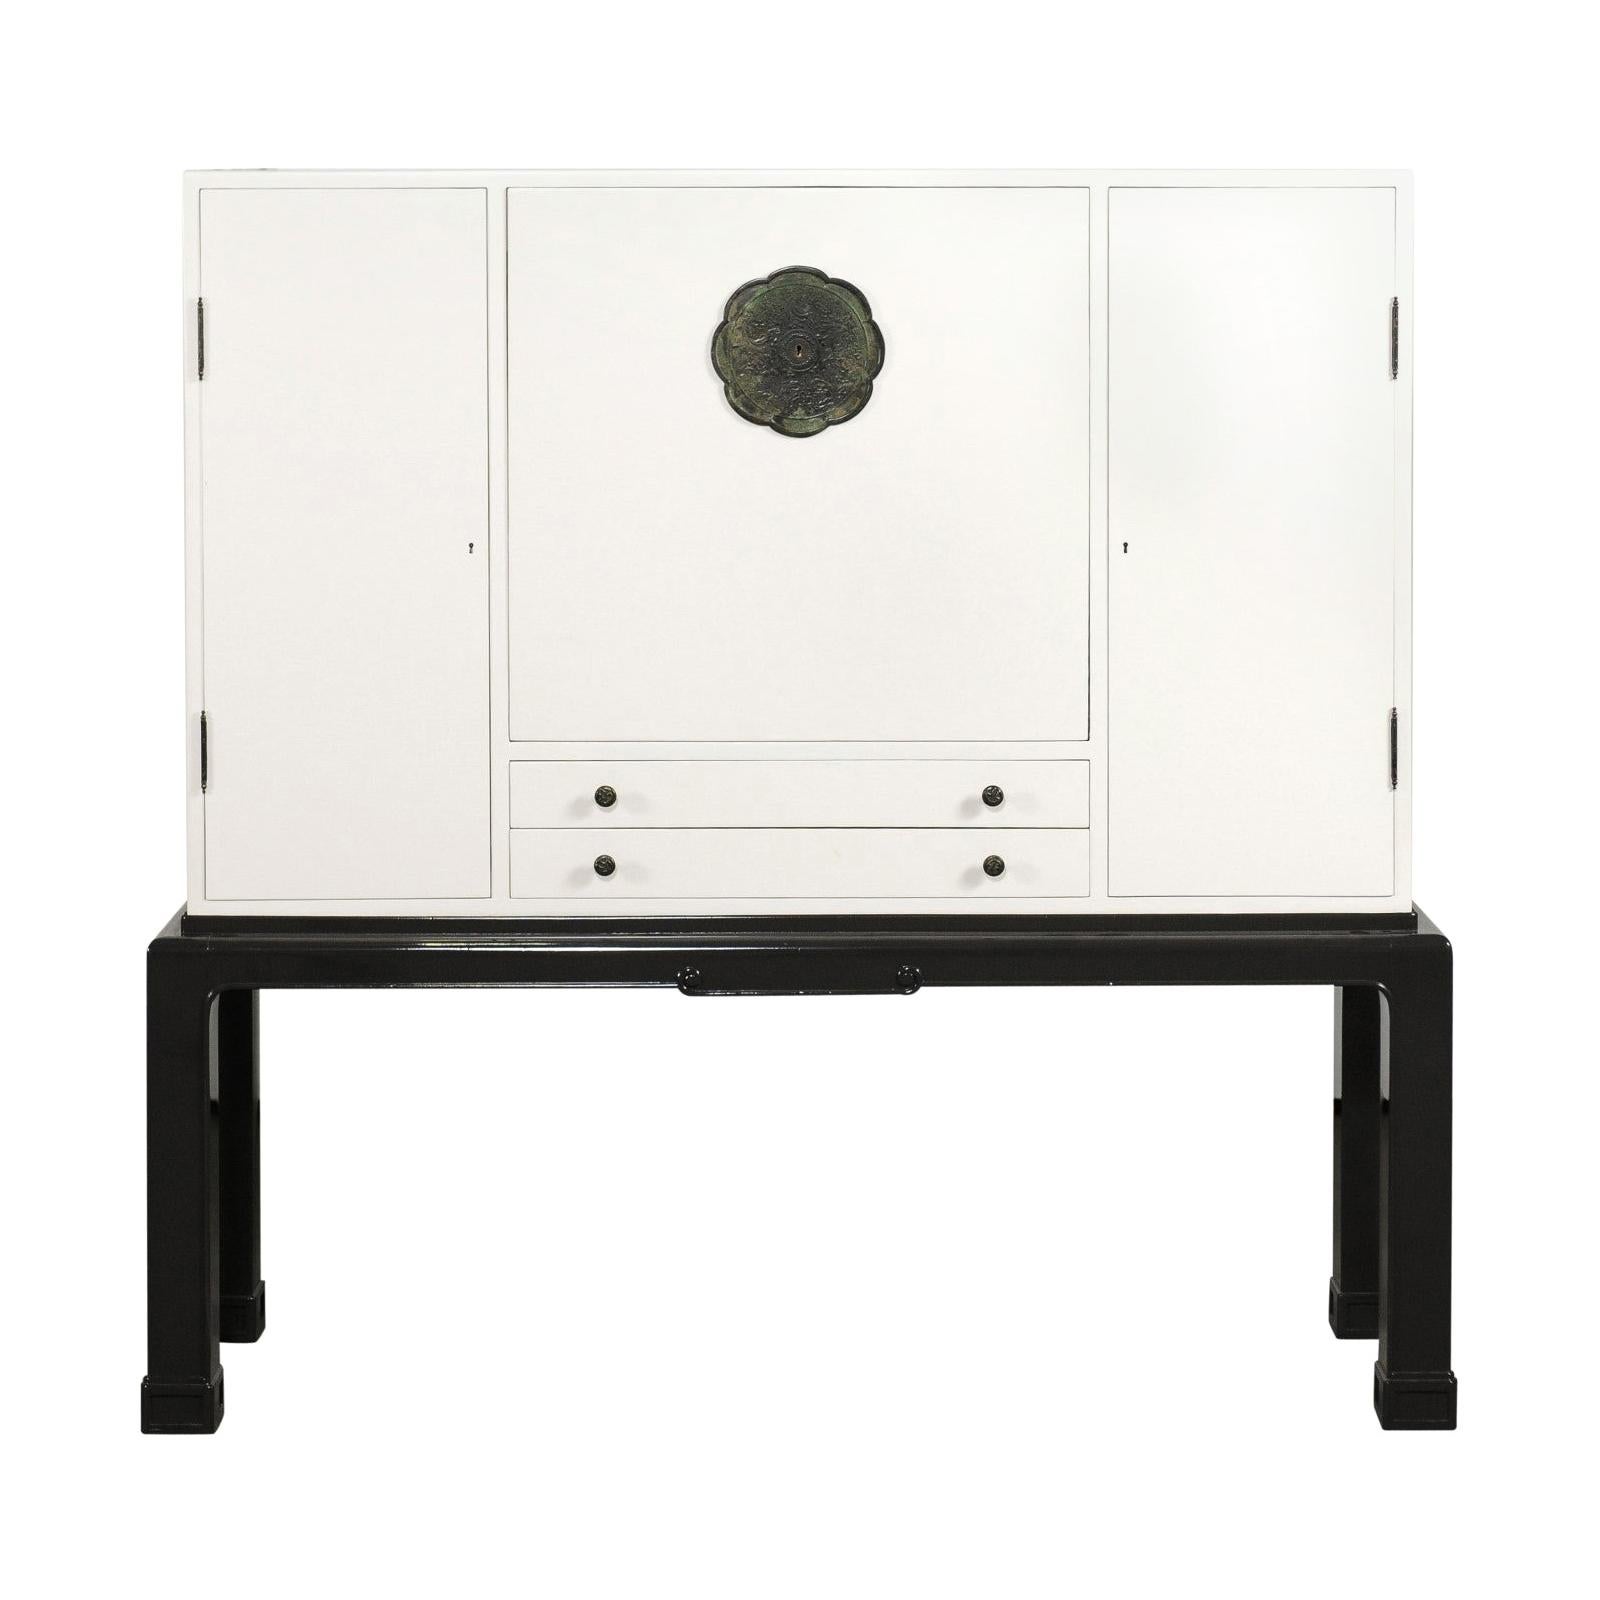 1940s French Chinoiserie-Style Black and White Lacquered Bar Cabinet For Sale